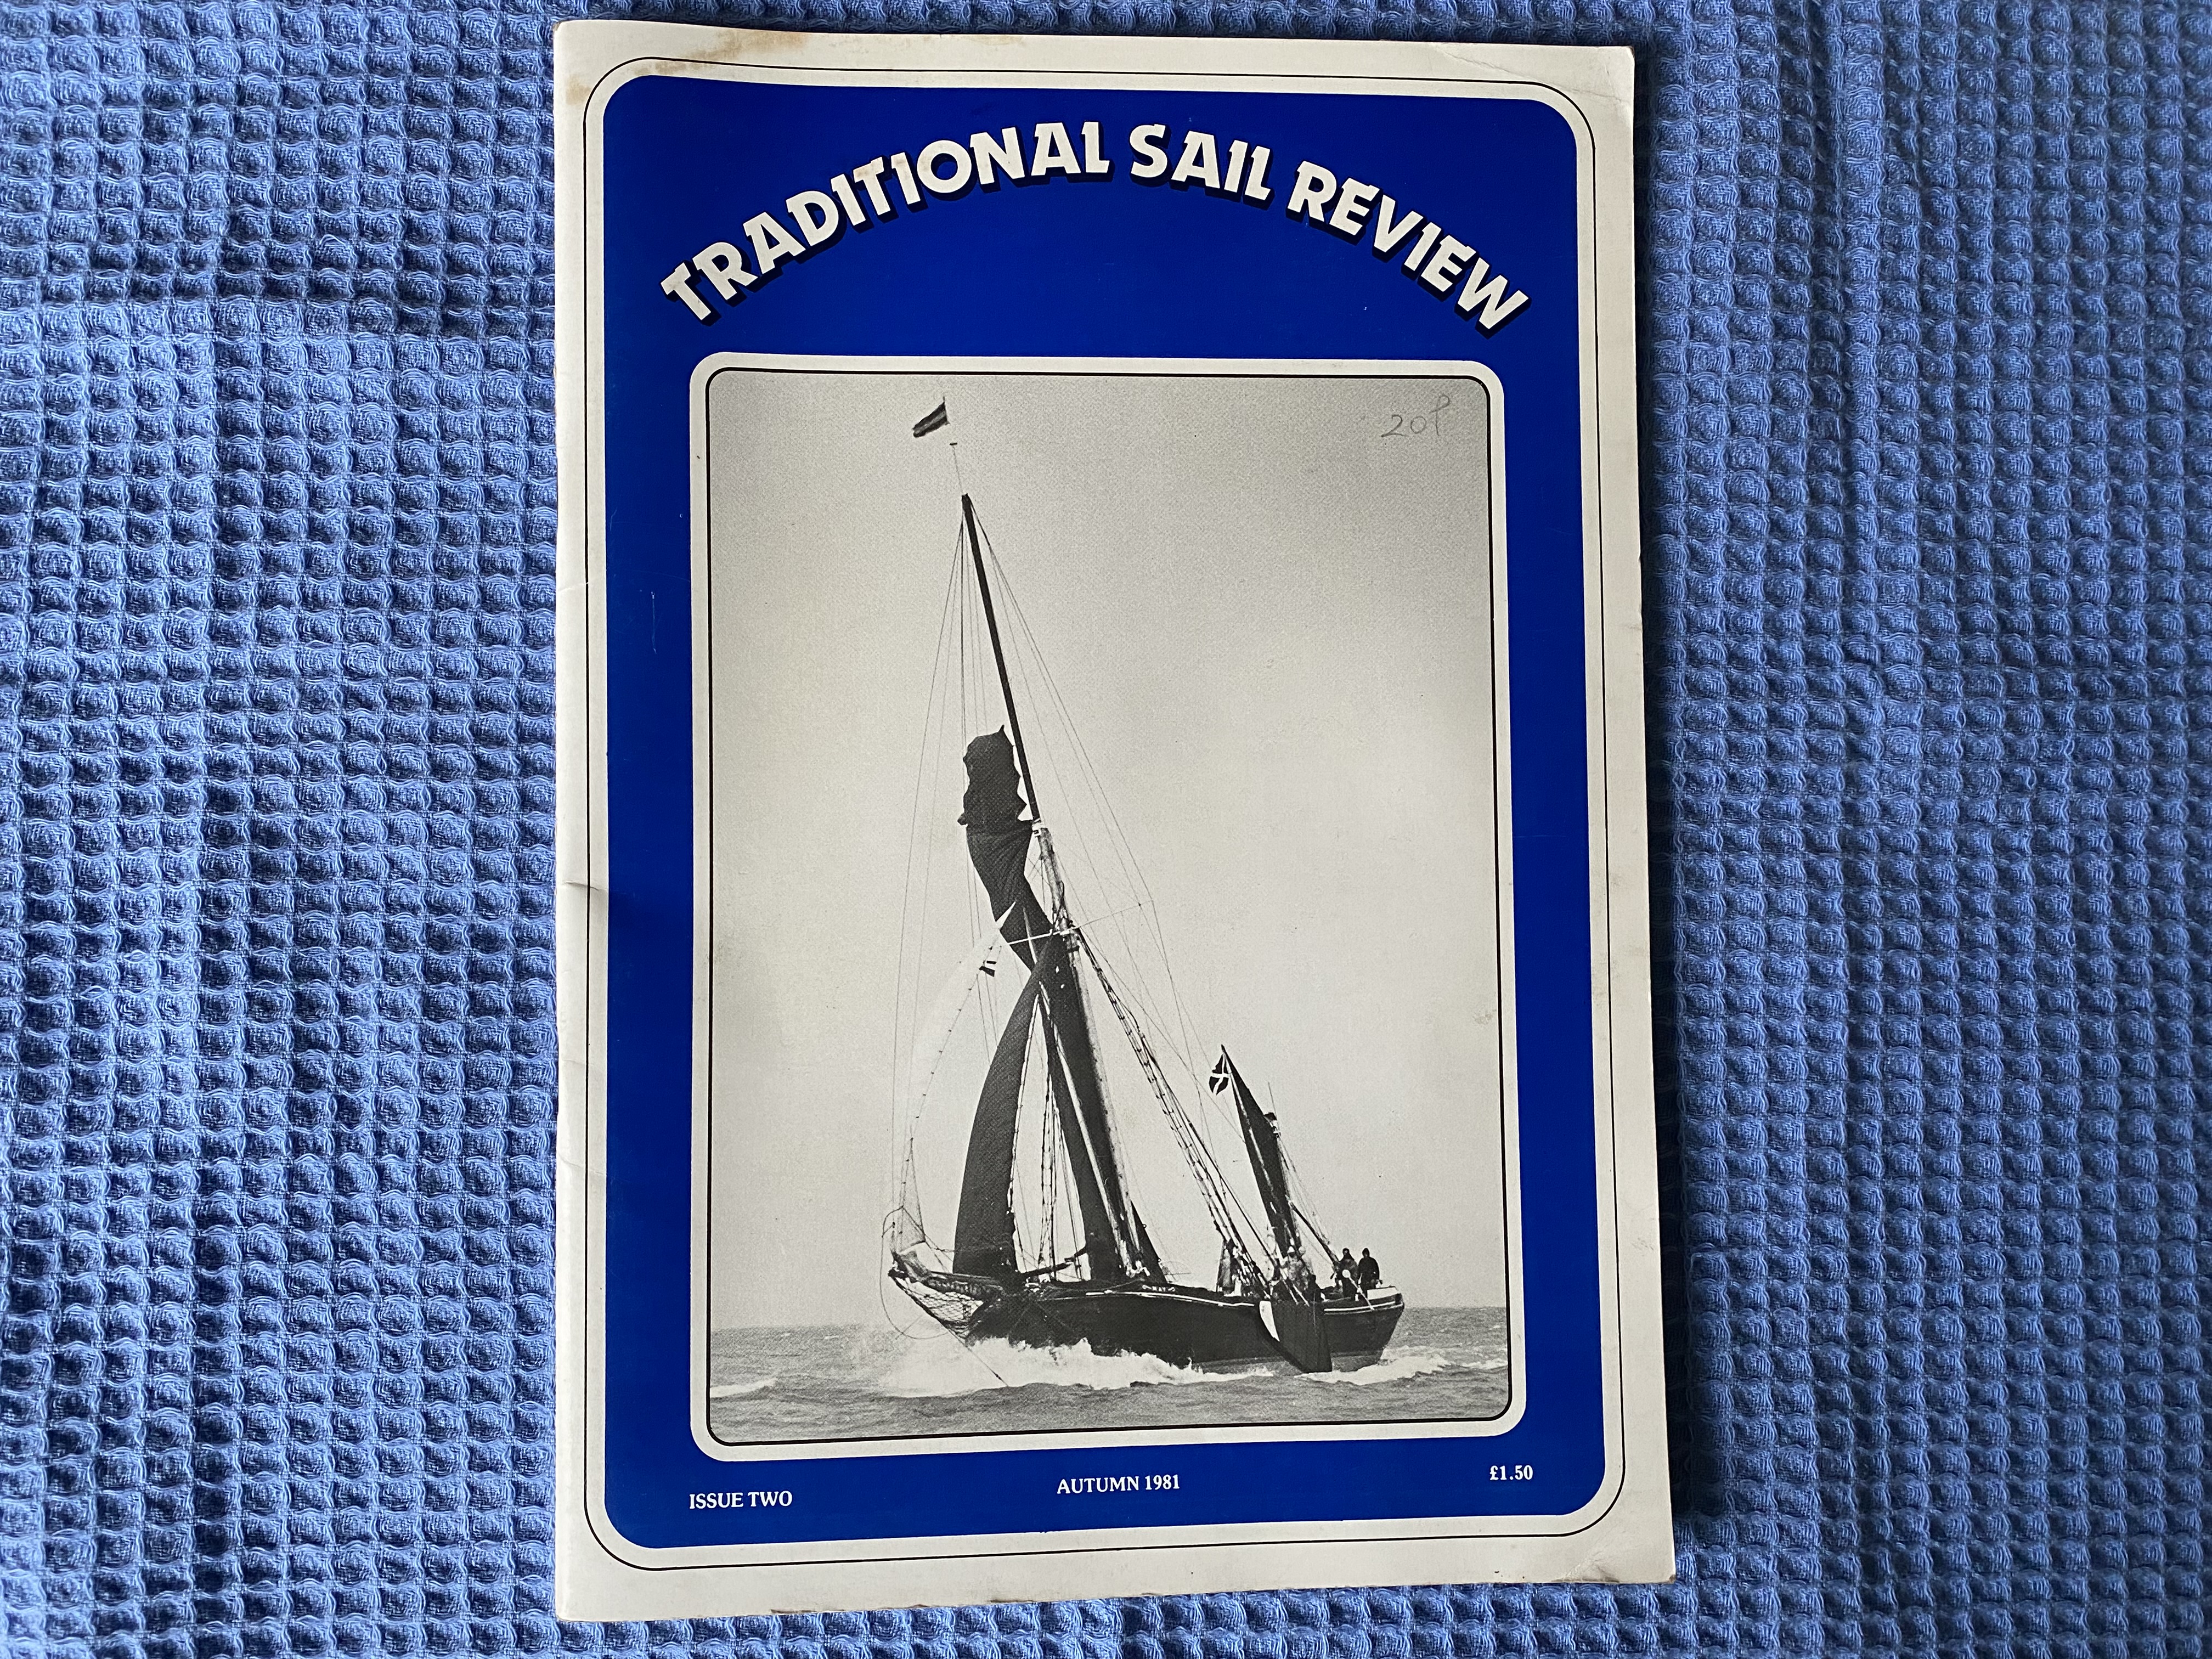 COPY OF THE NAUTICAL MAGAZINE THE TRADITIONAL SAIL REVIEW DATED AUTUMN 1981